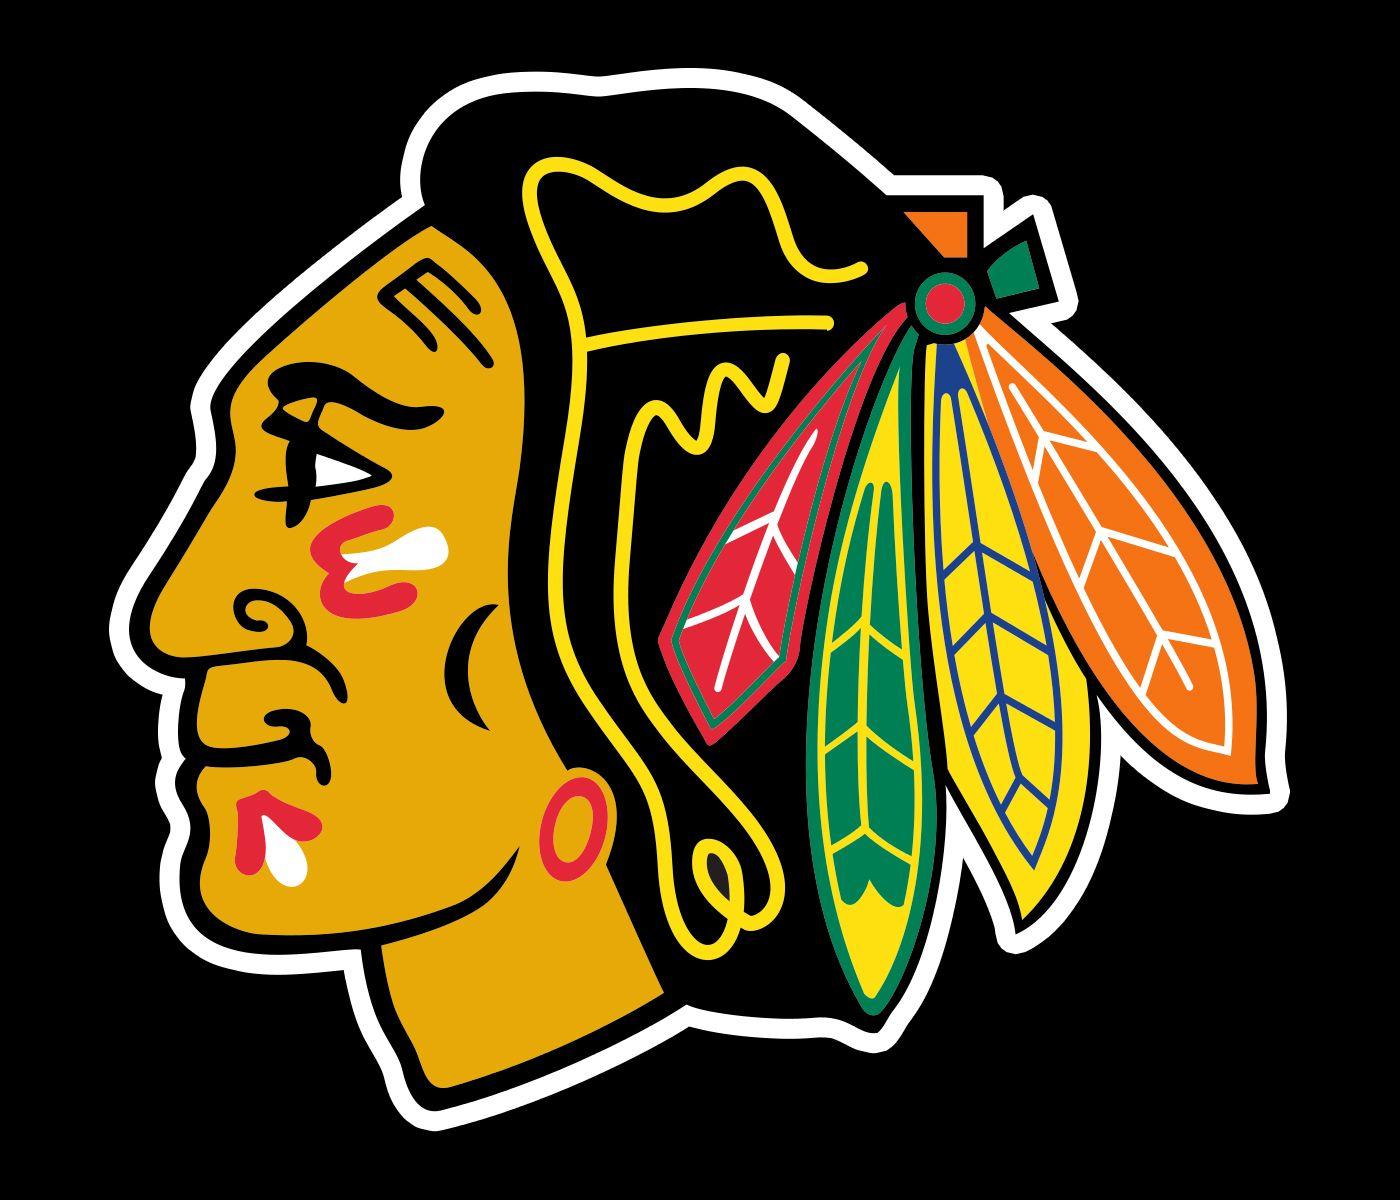 Chicago Hawks Logo - Blackhawks Logo, Blackhawks Symbol, Meaning, History and Evolution